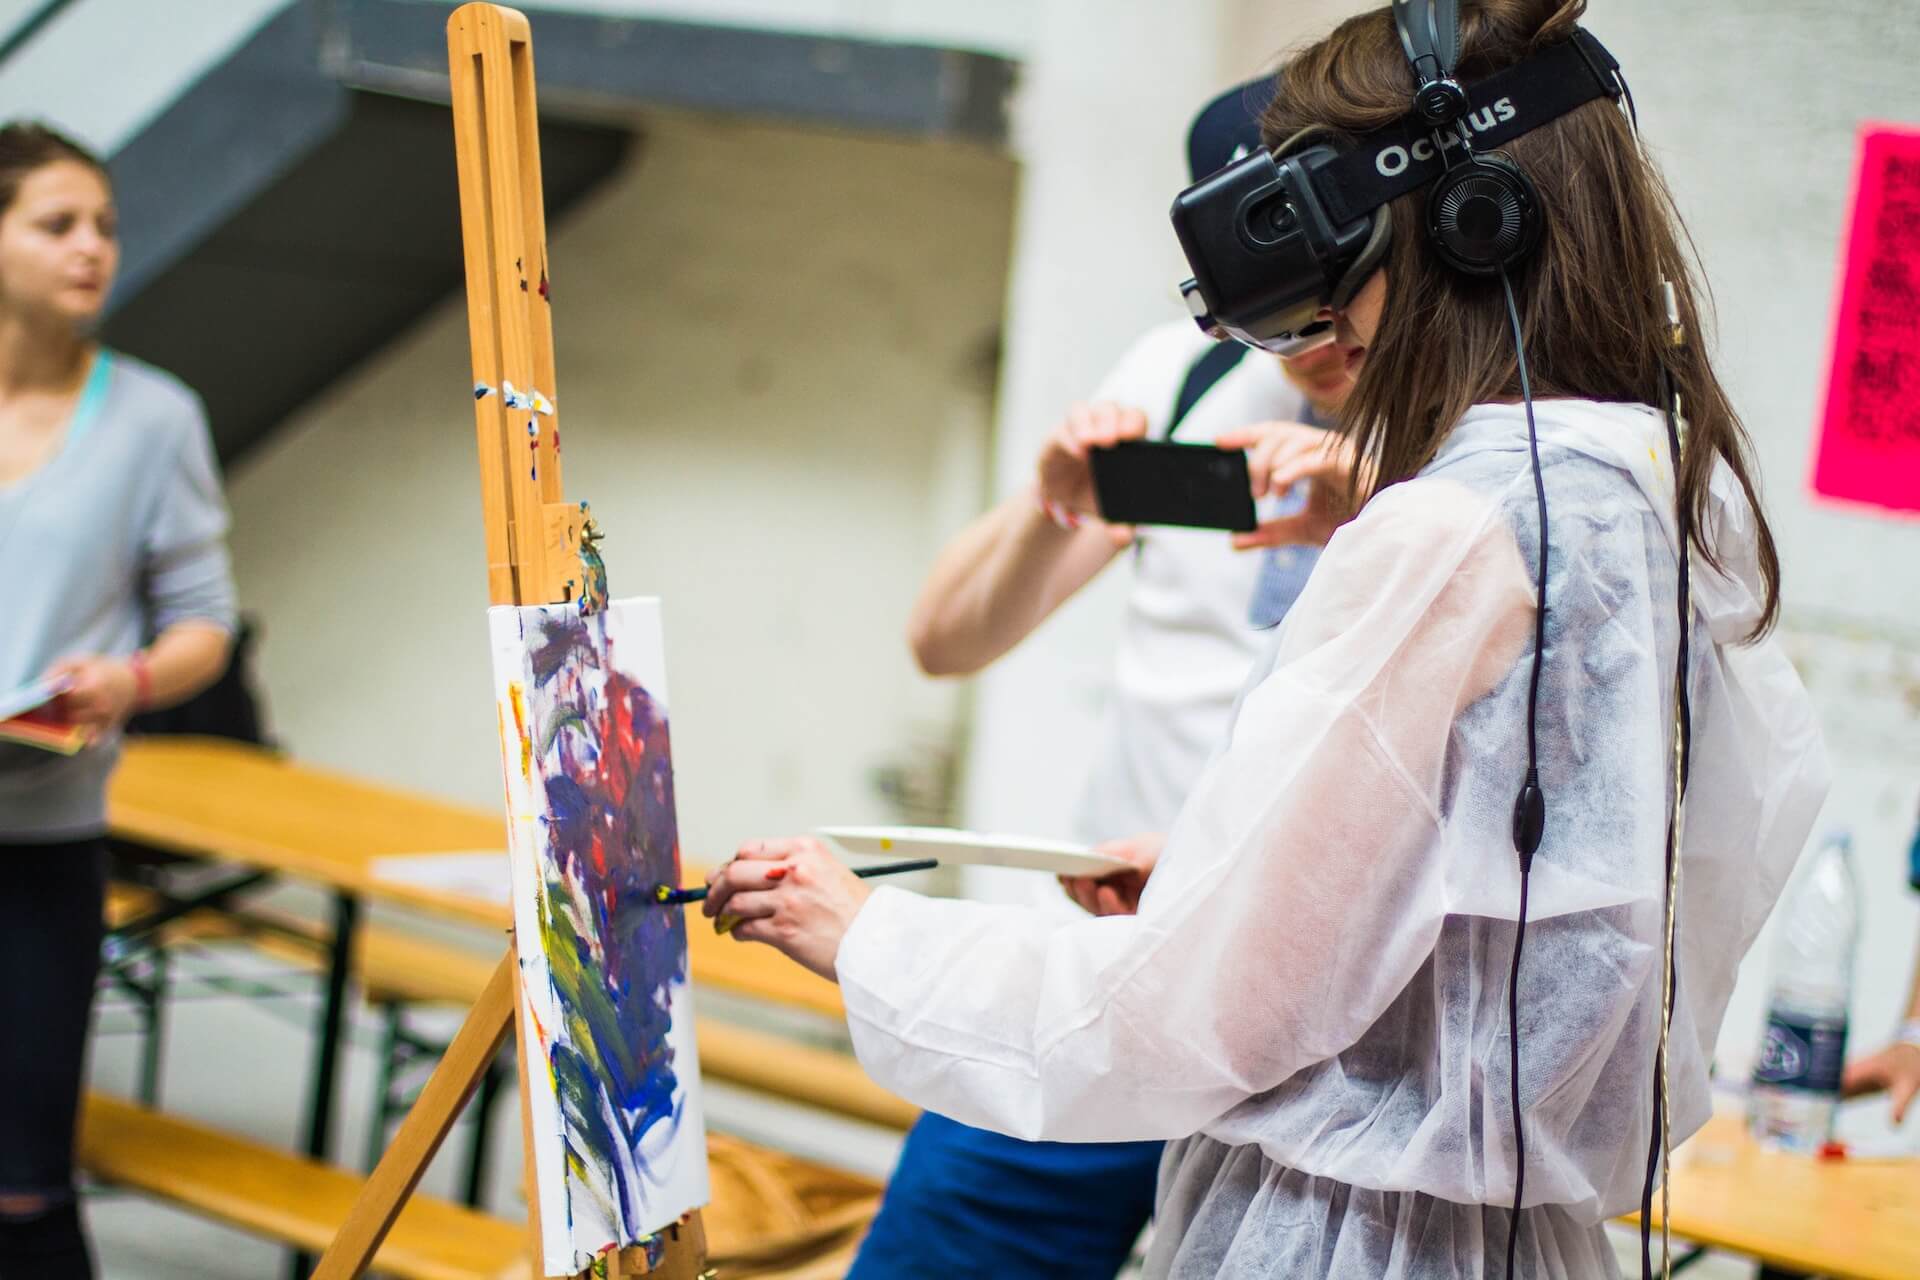 A girl painting on a canvas with a VR headset on